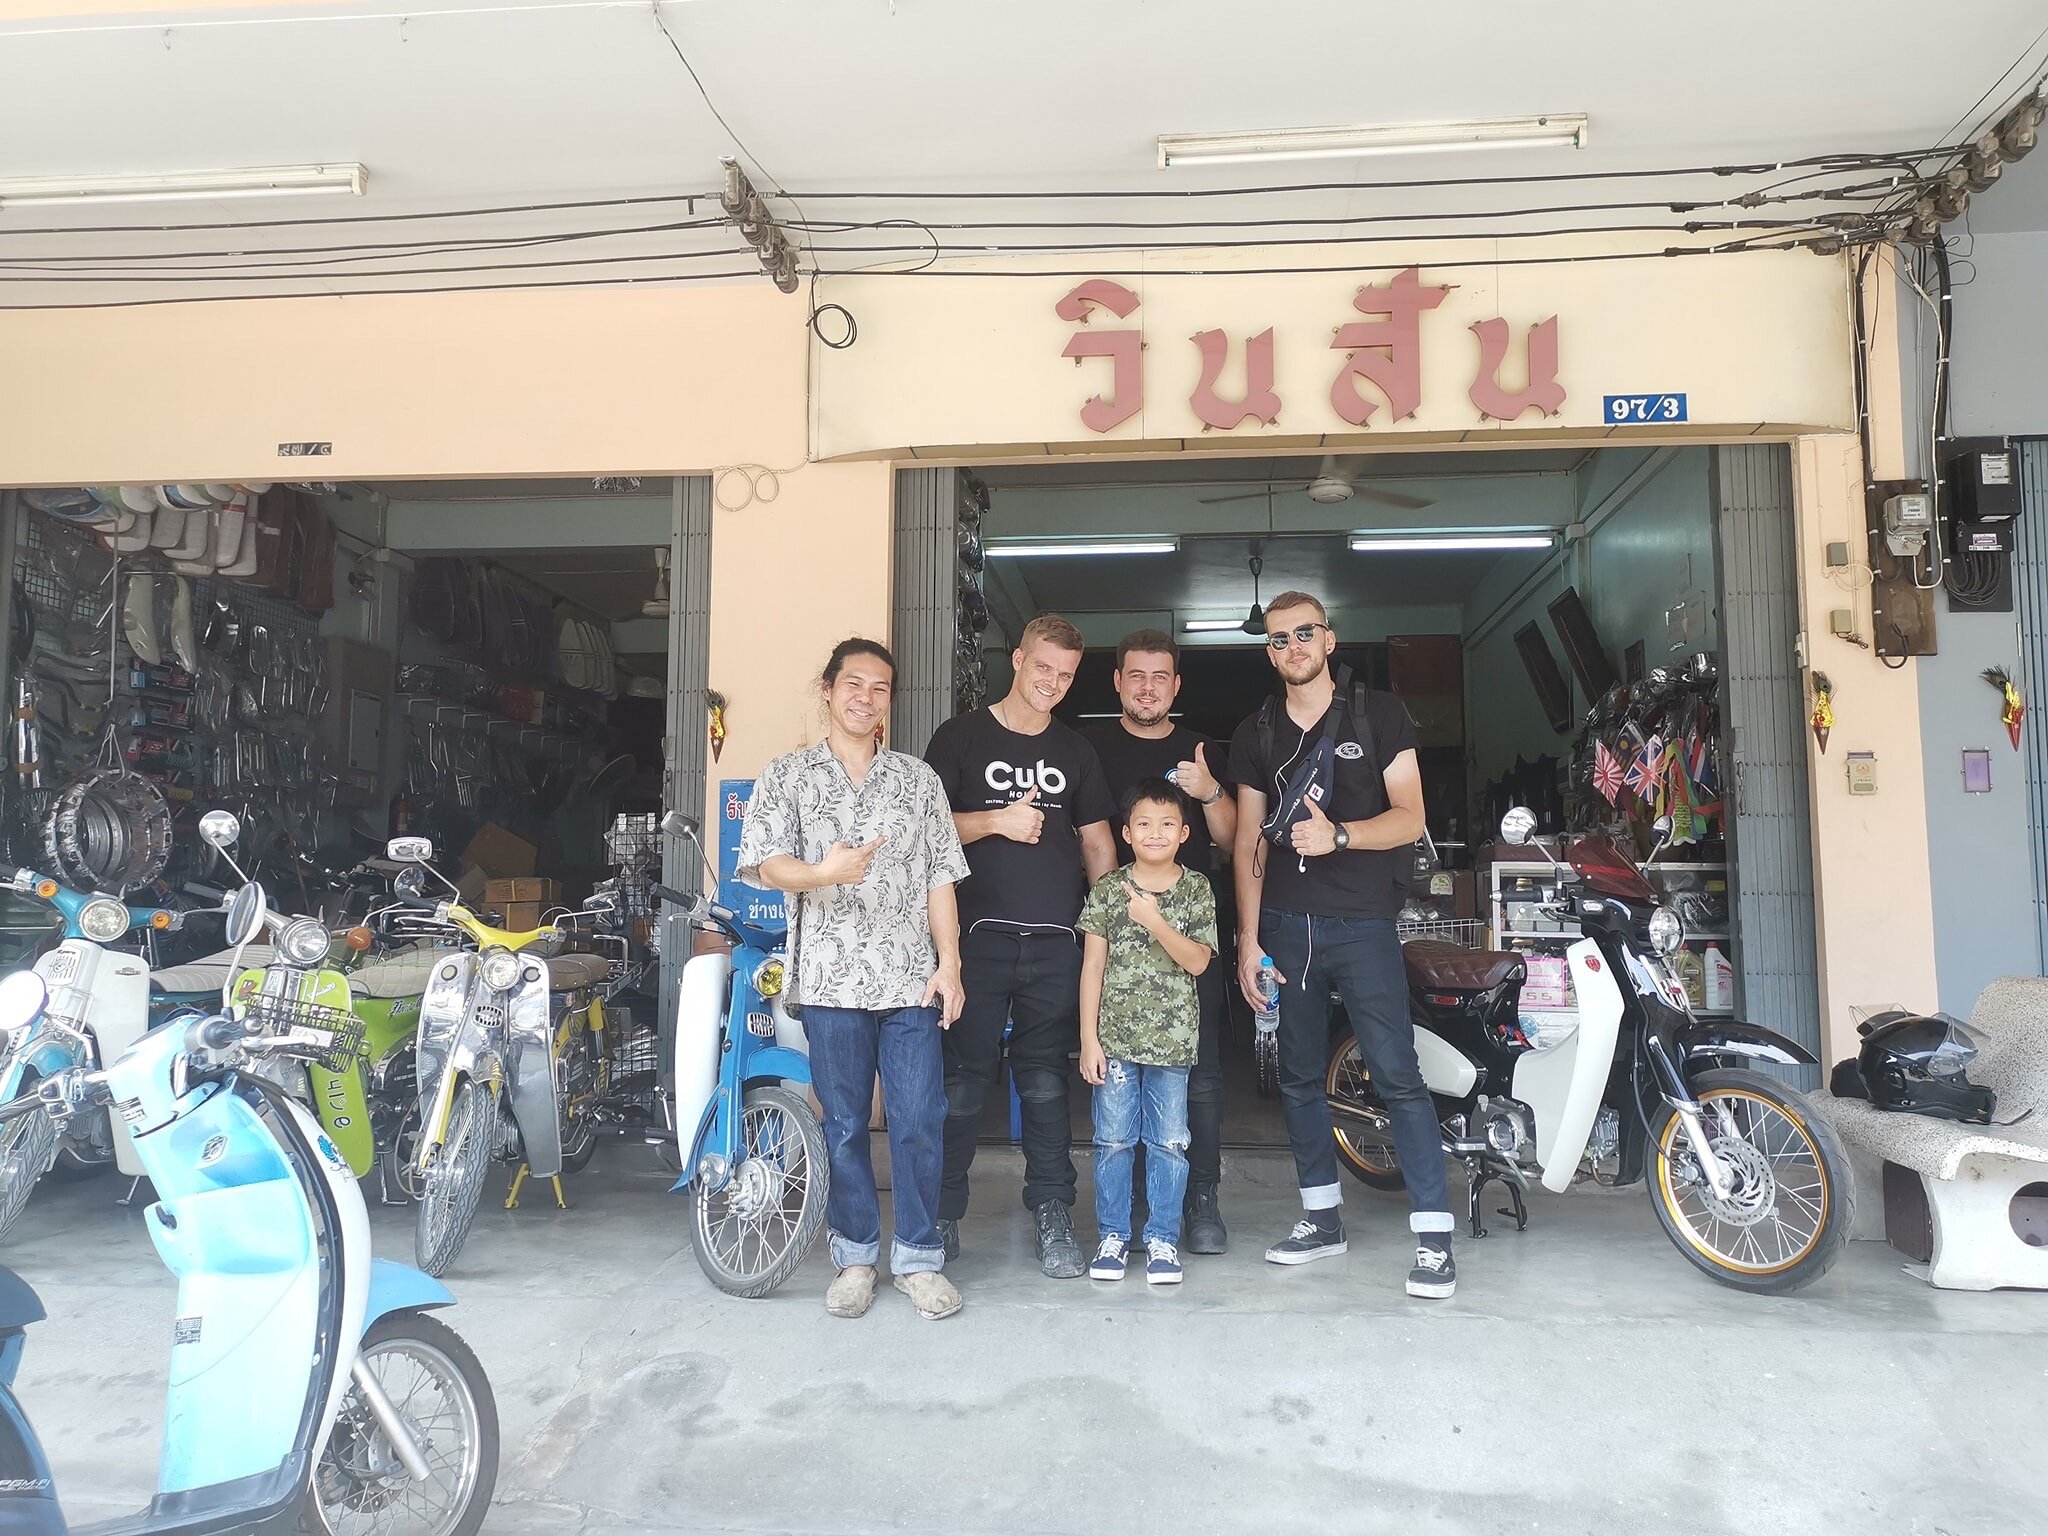 With the owner of the shop